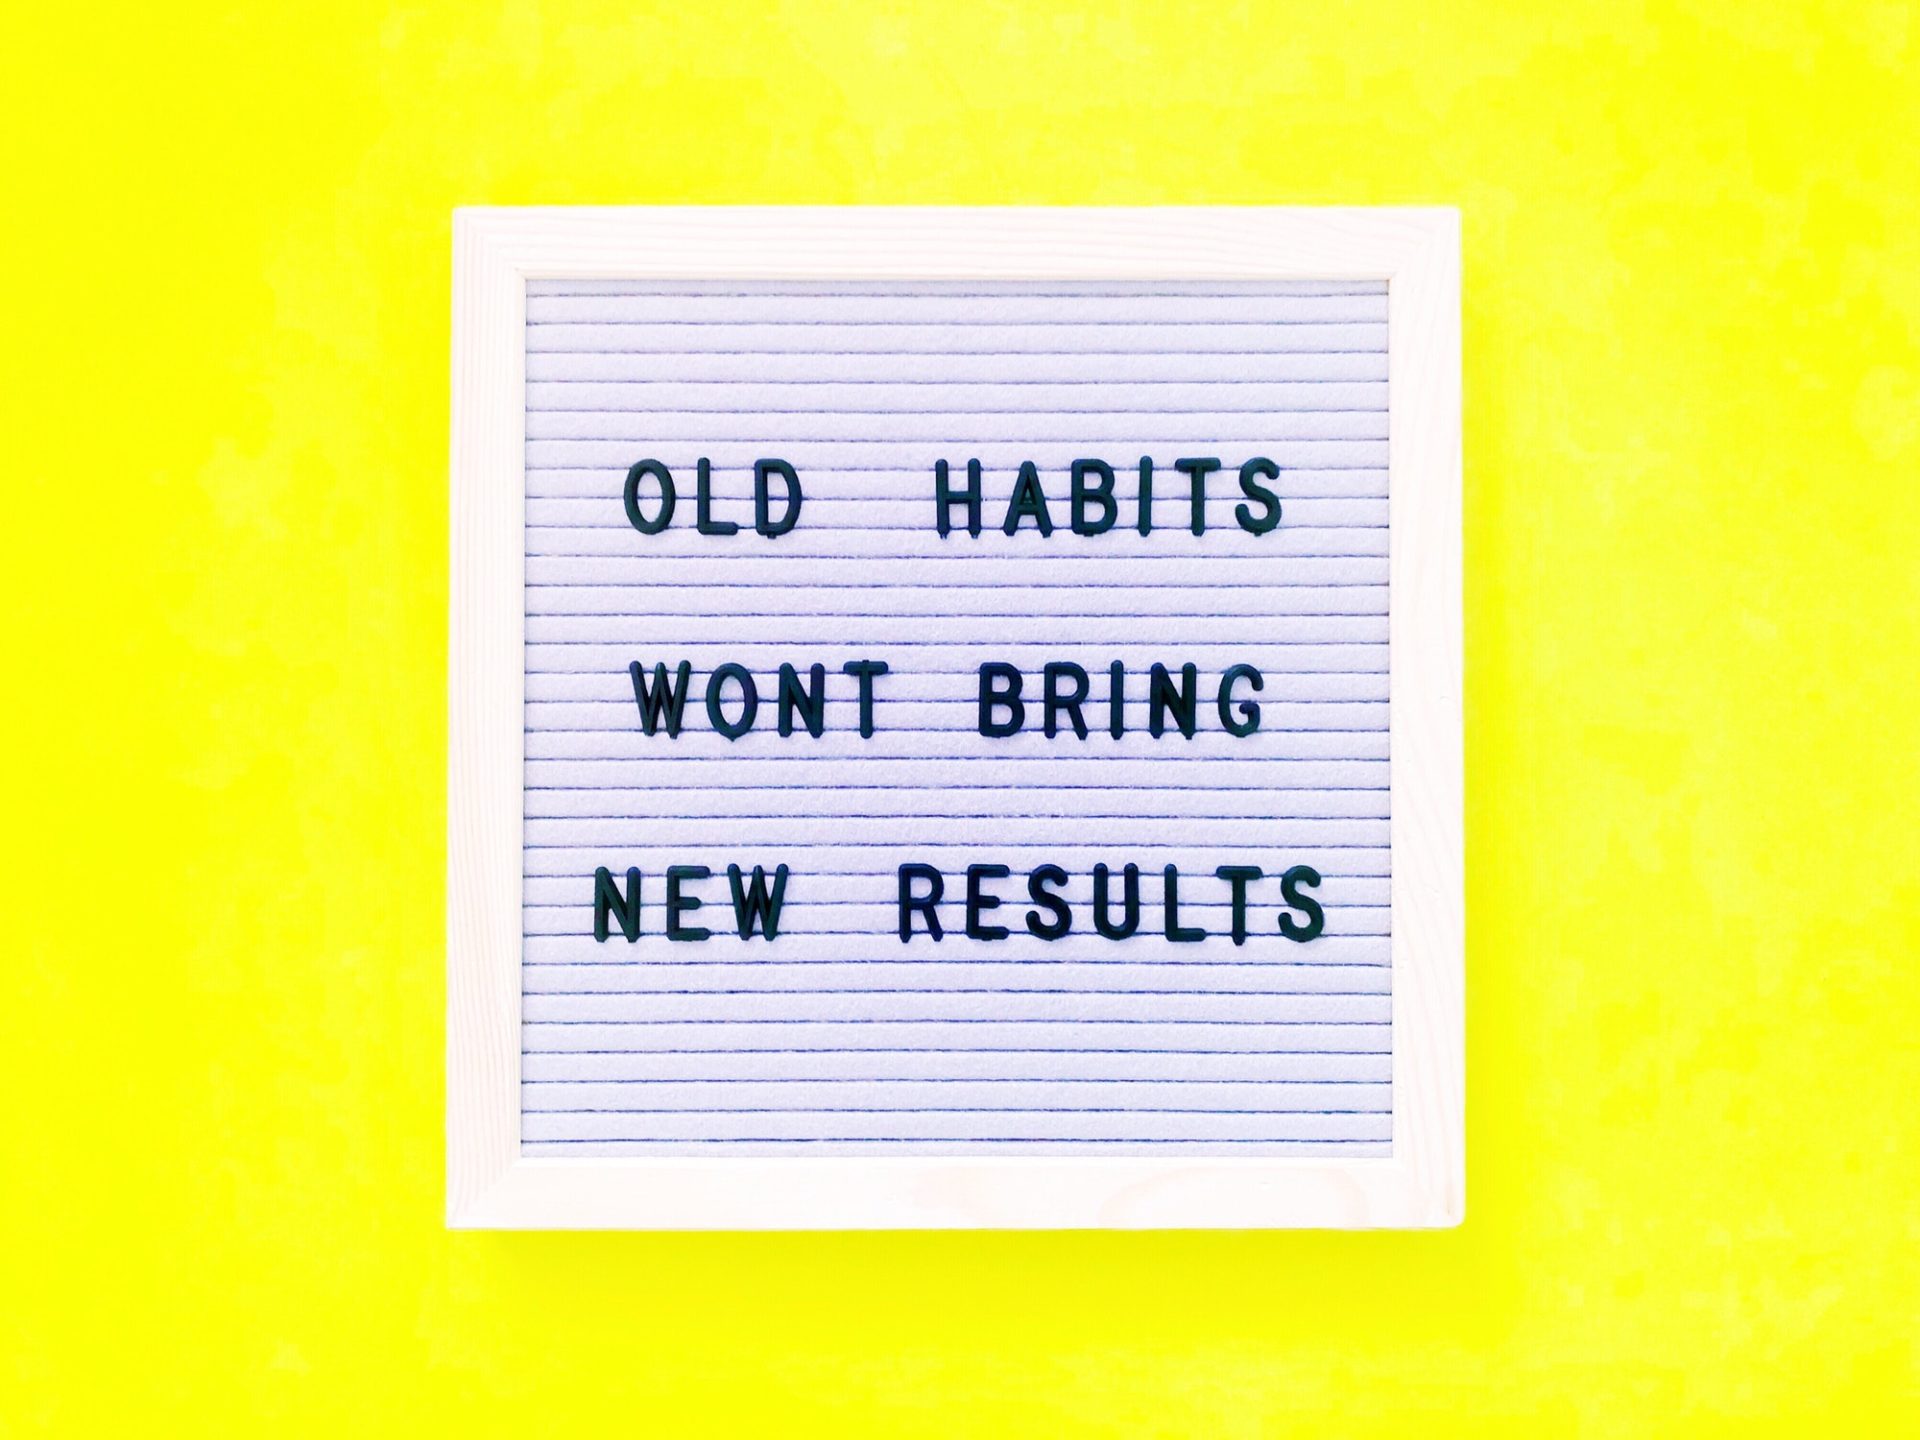 Quote about habits